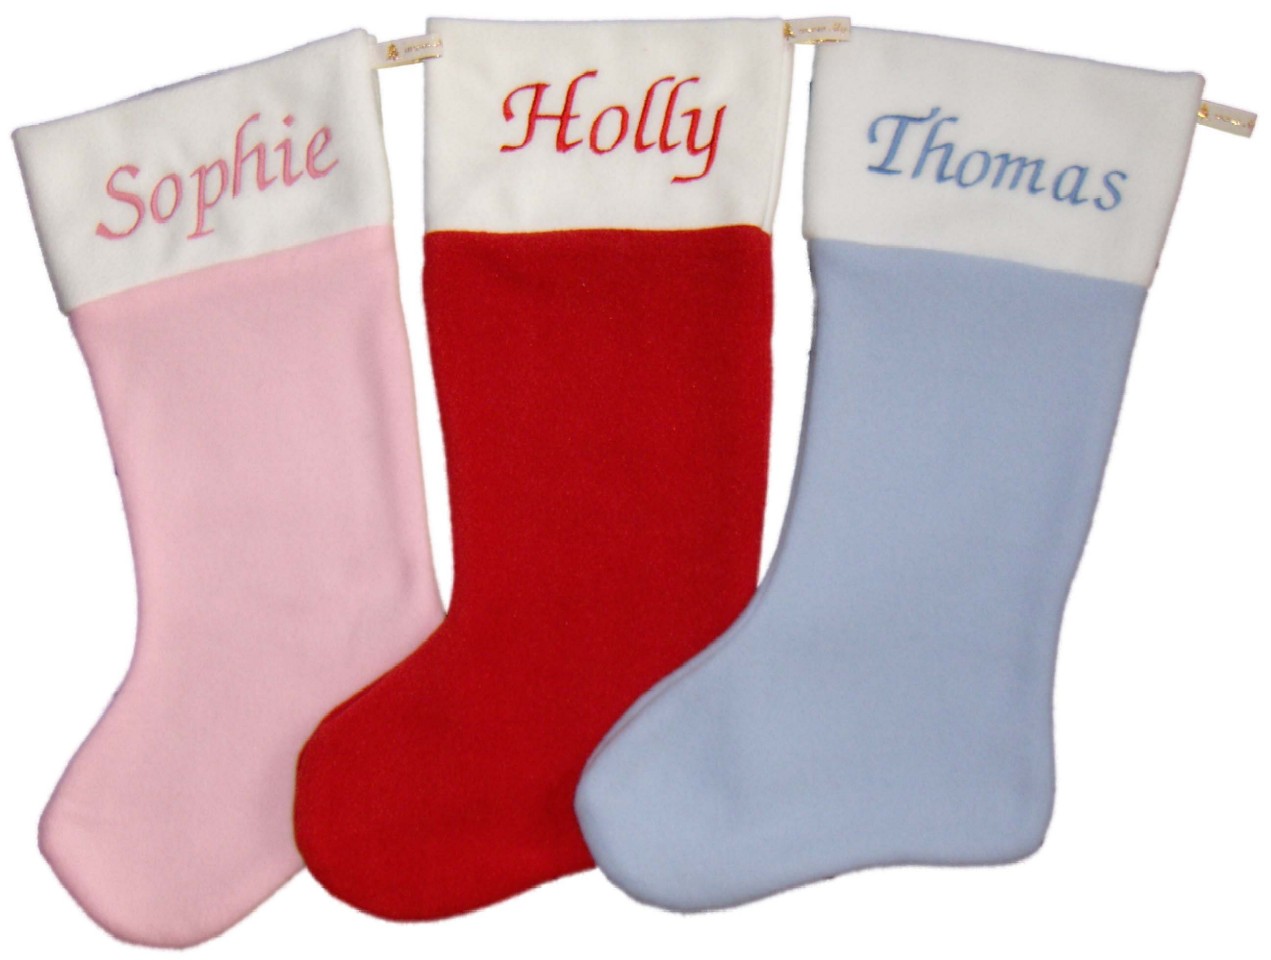 Personalised Christmas Stockings from £6.99  Free Delivery